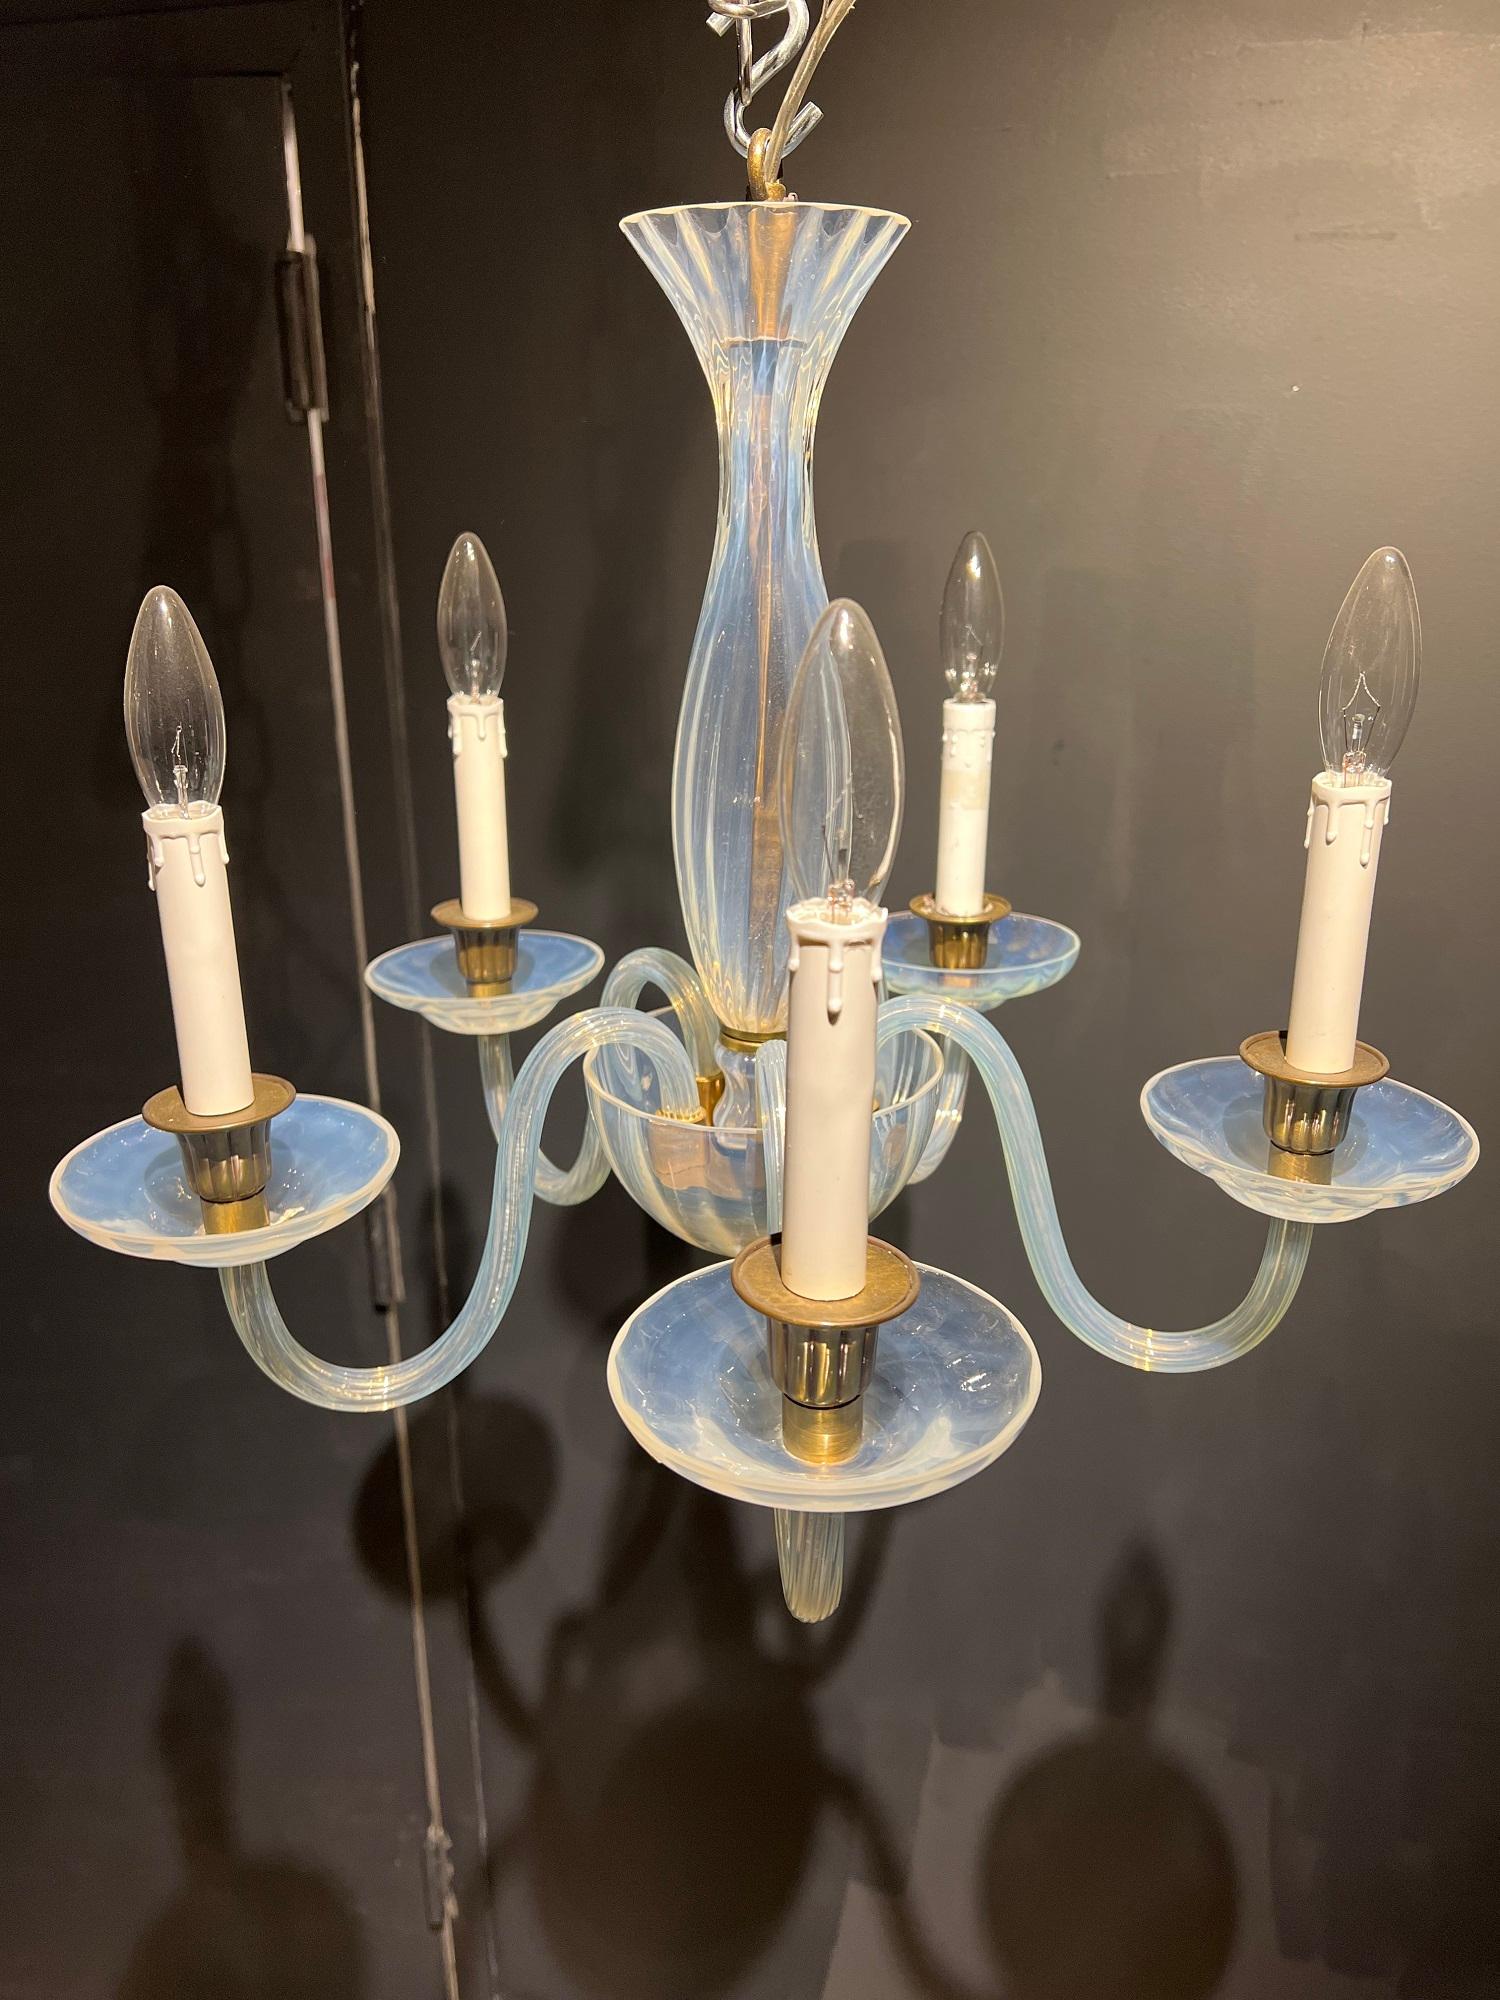 A circa 1930’s opalescent murano glass chandelier with 5 lights 